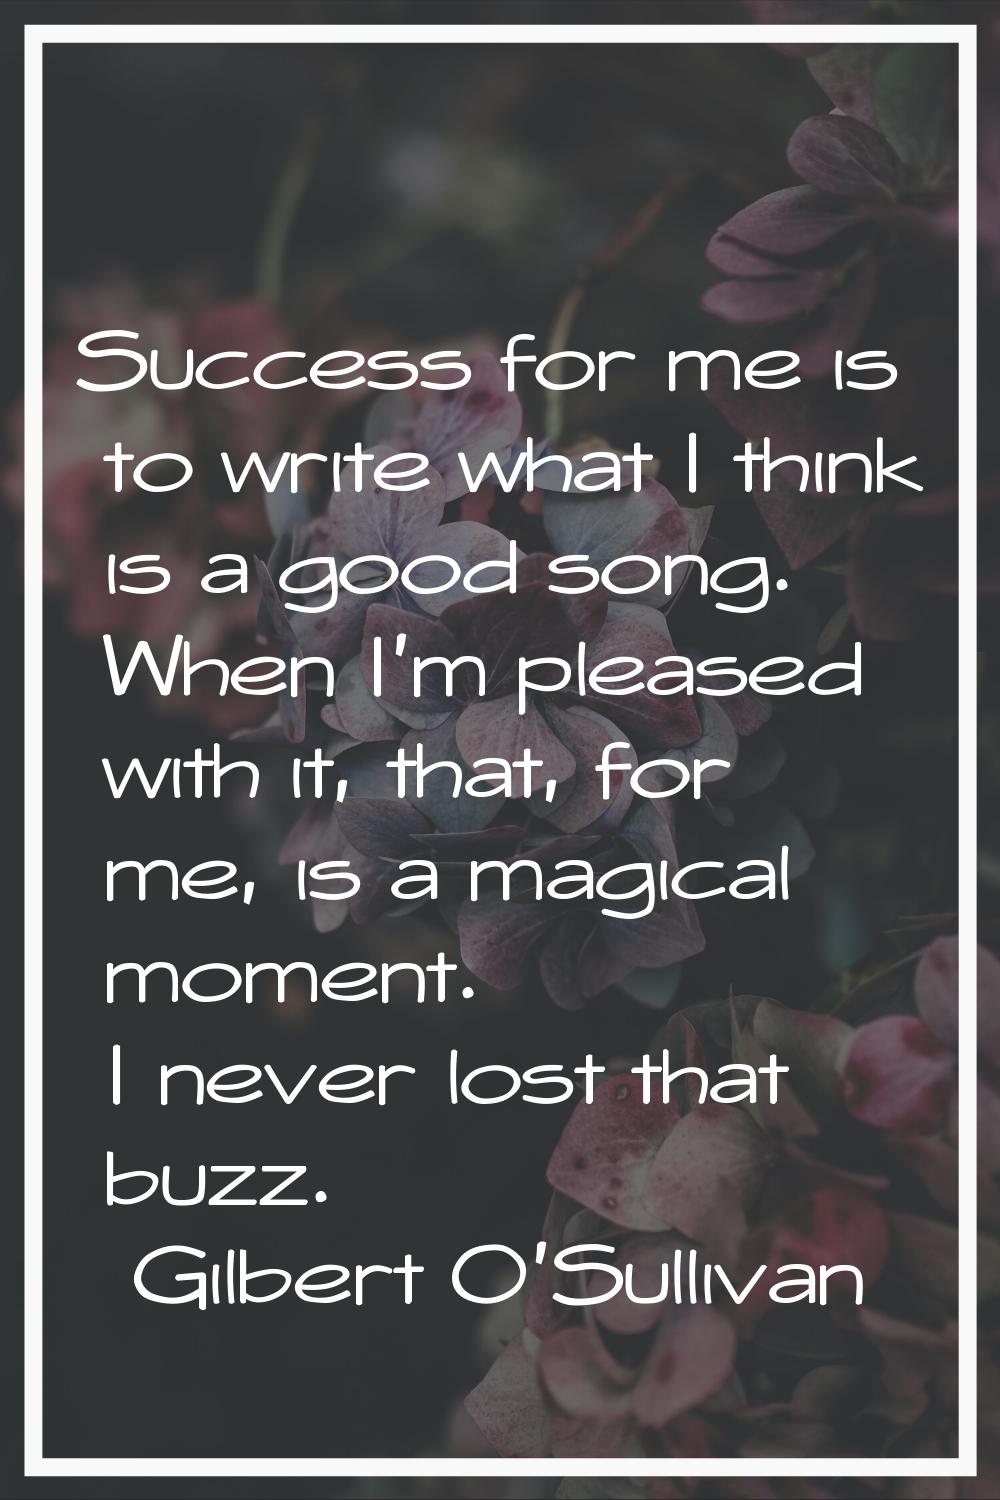 Success for me is to write what I think is a good song. When I'm pleased with it, that, for me, is 